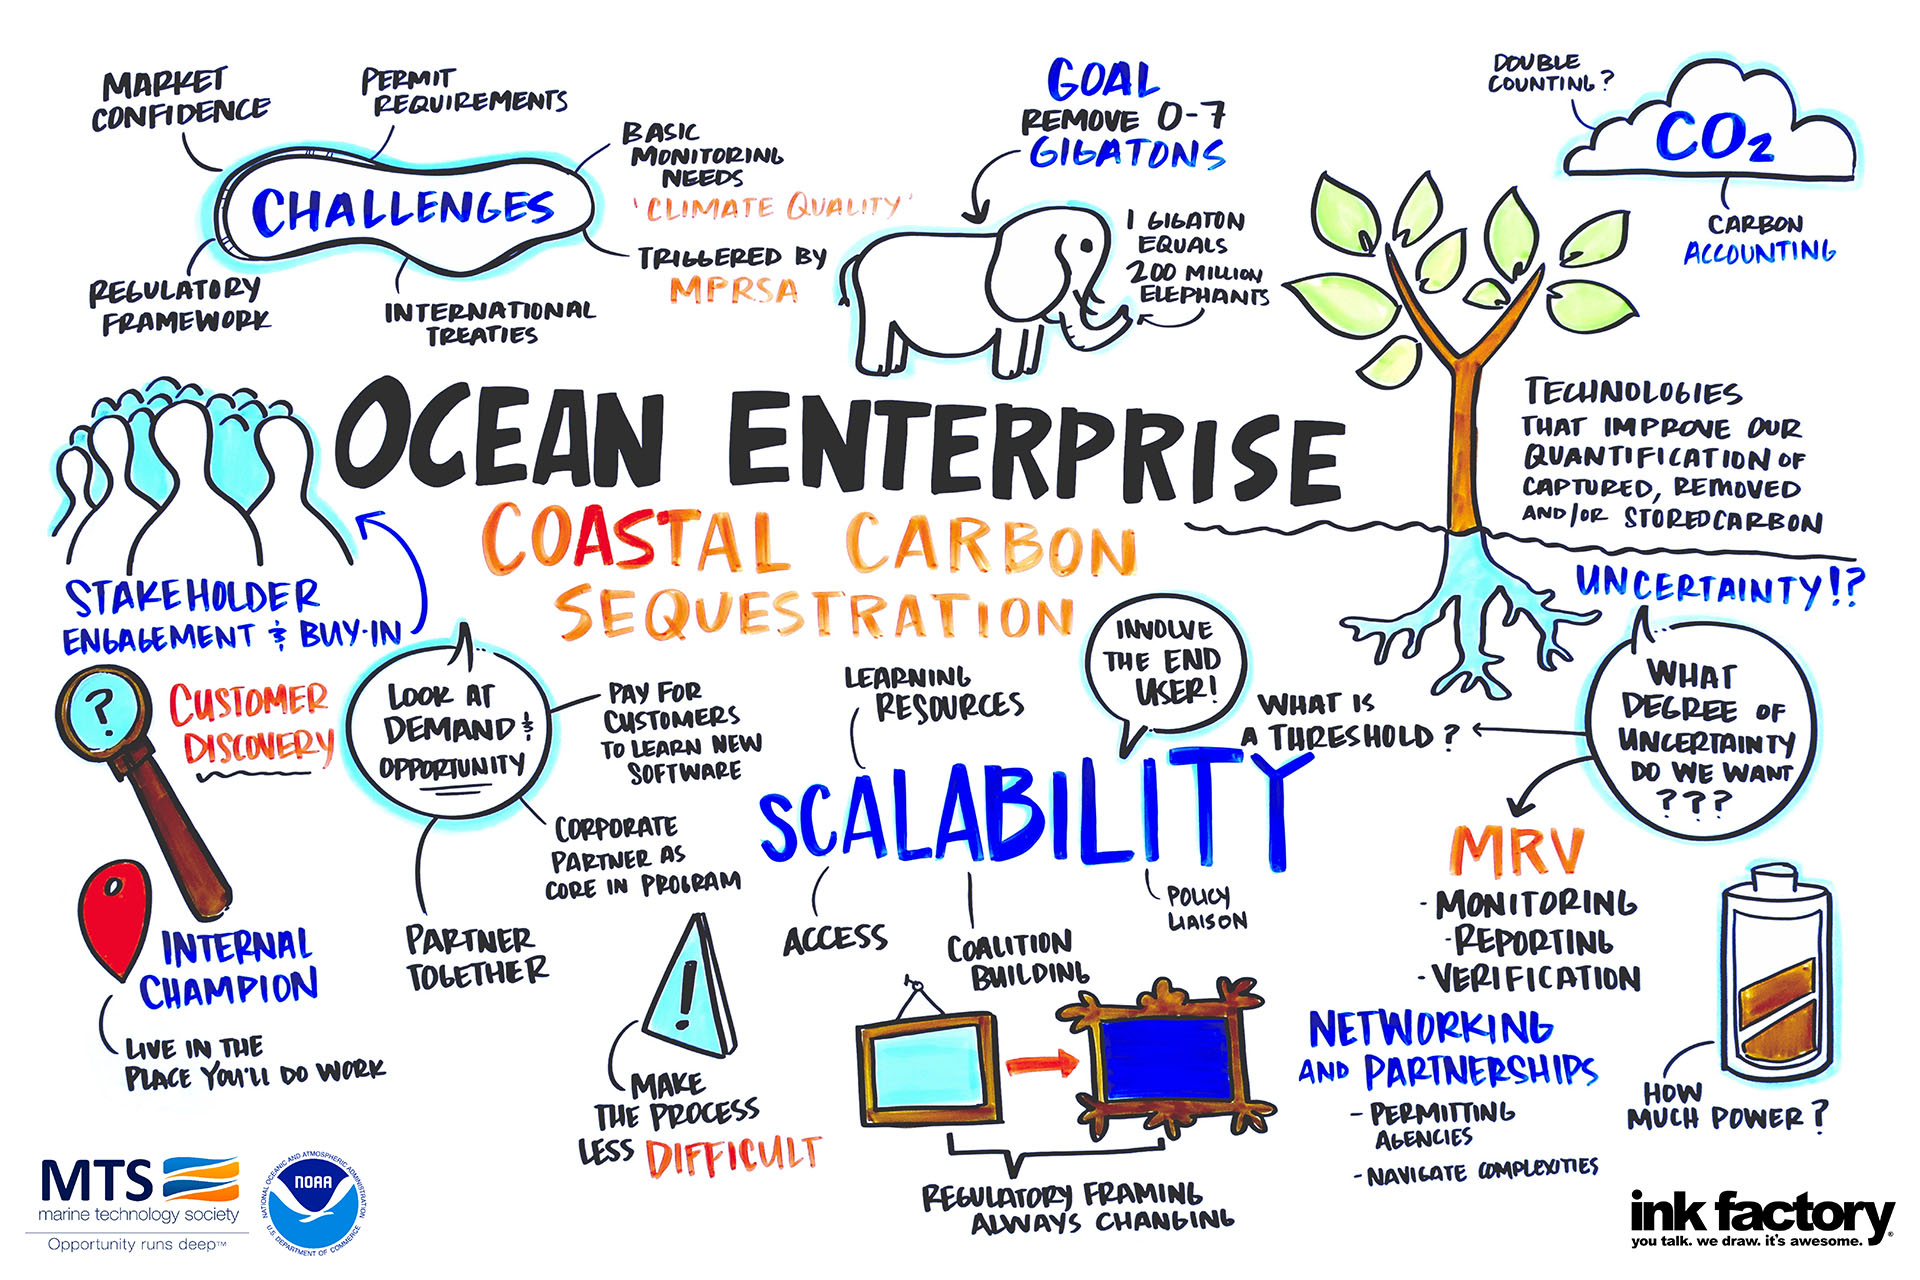 visual notes from OCRA kick-off meeting carbon sequestration session